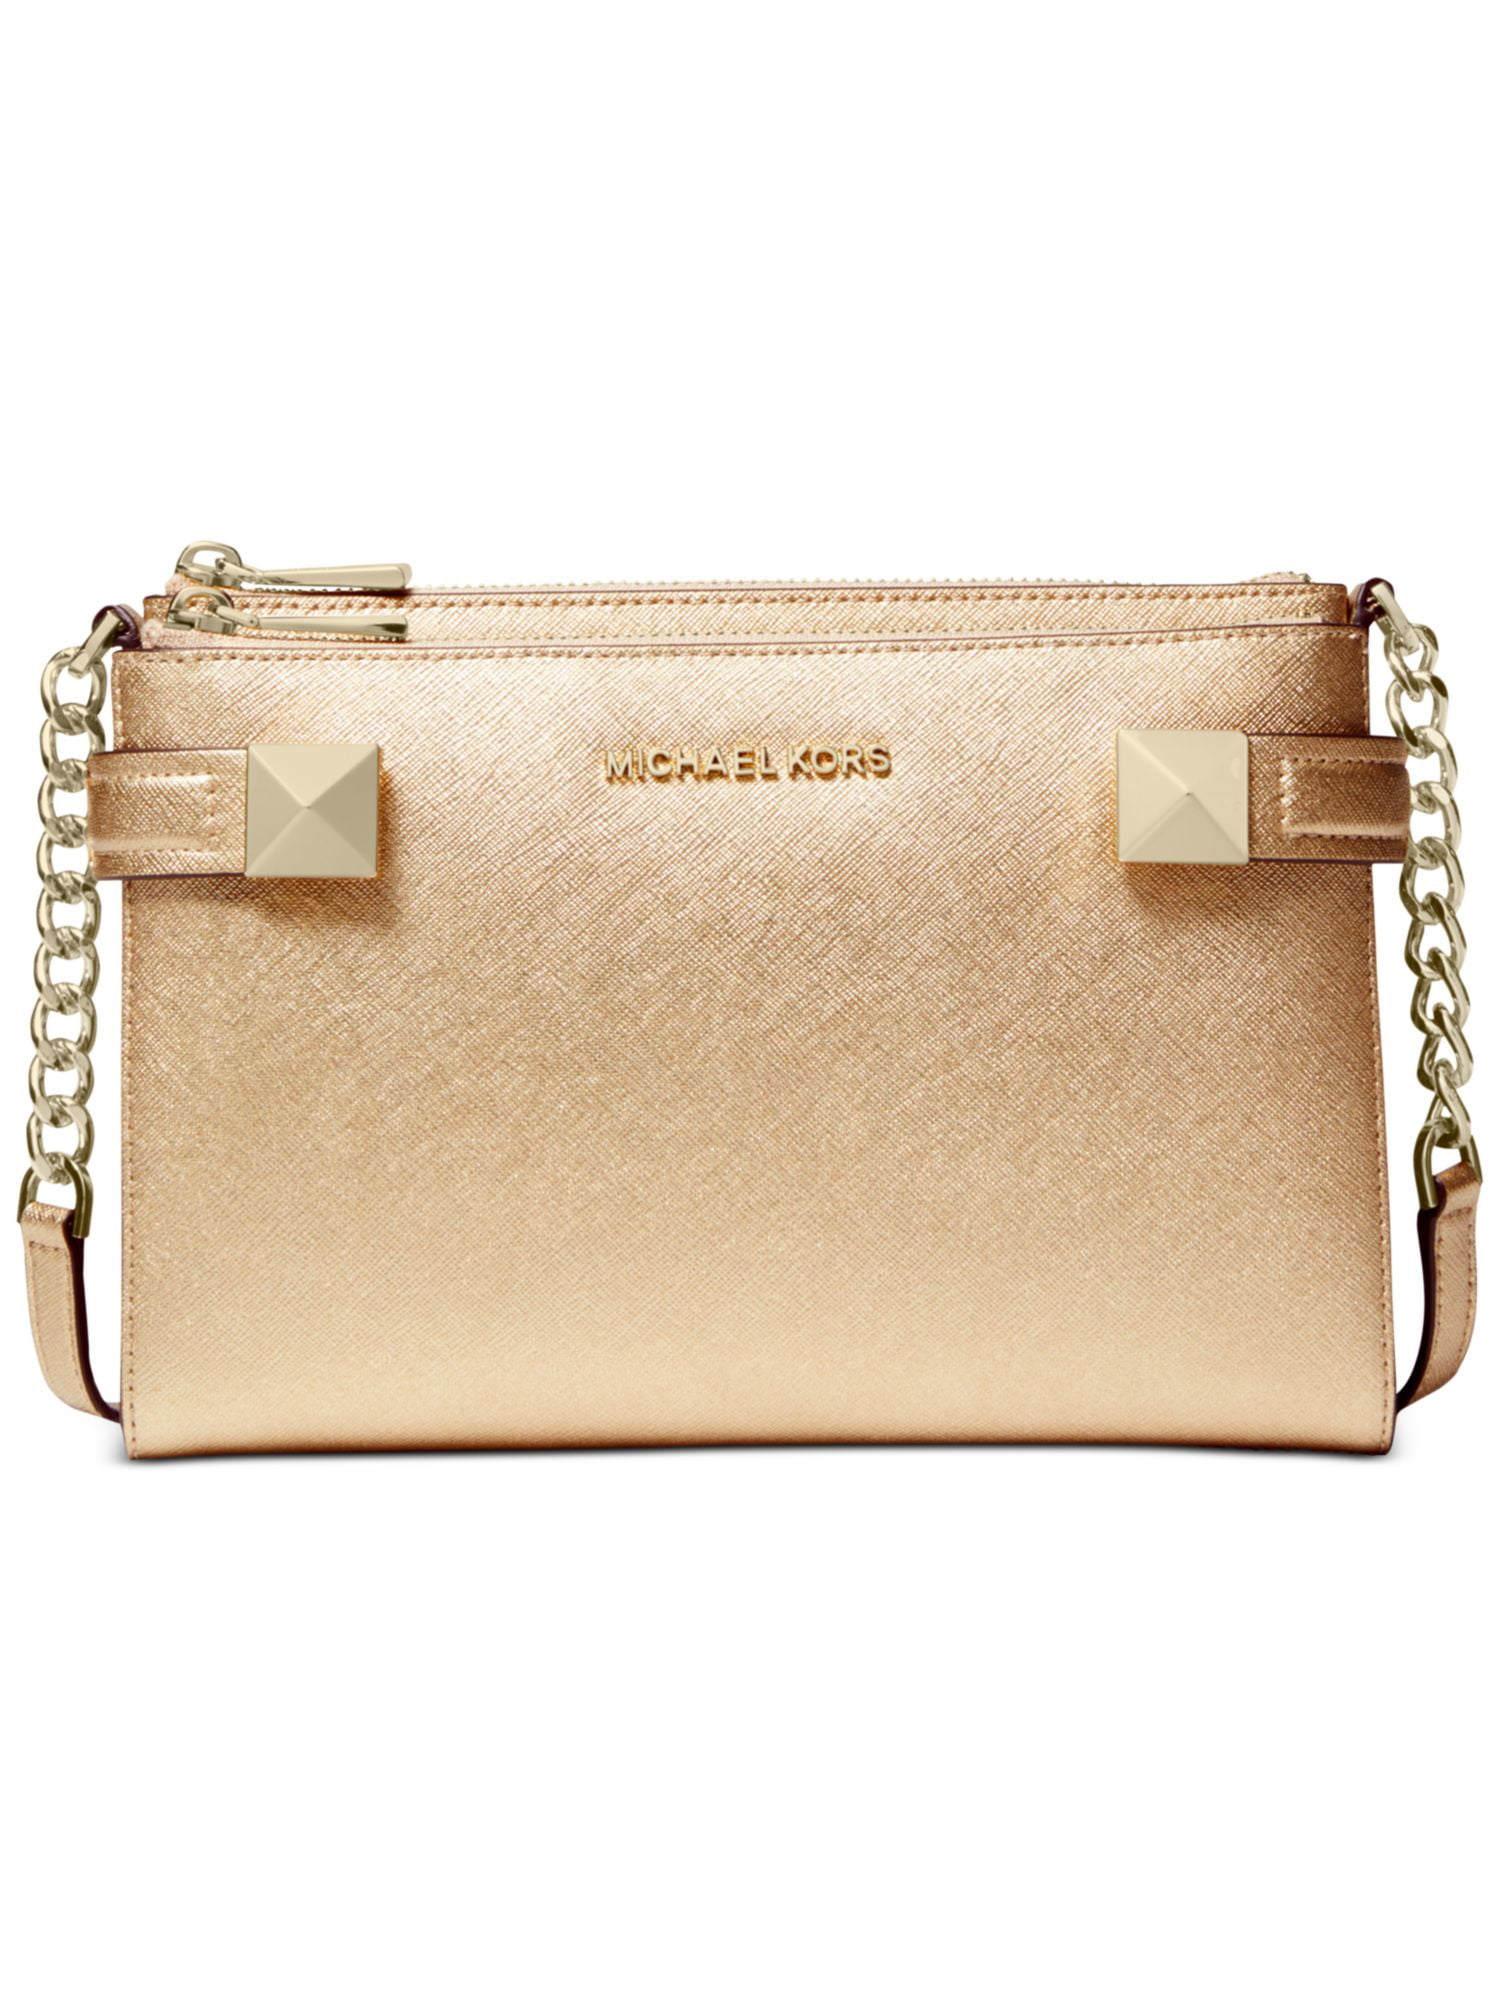 MICHAEL KORS Gold Leather Clutch 